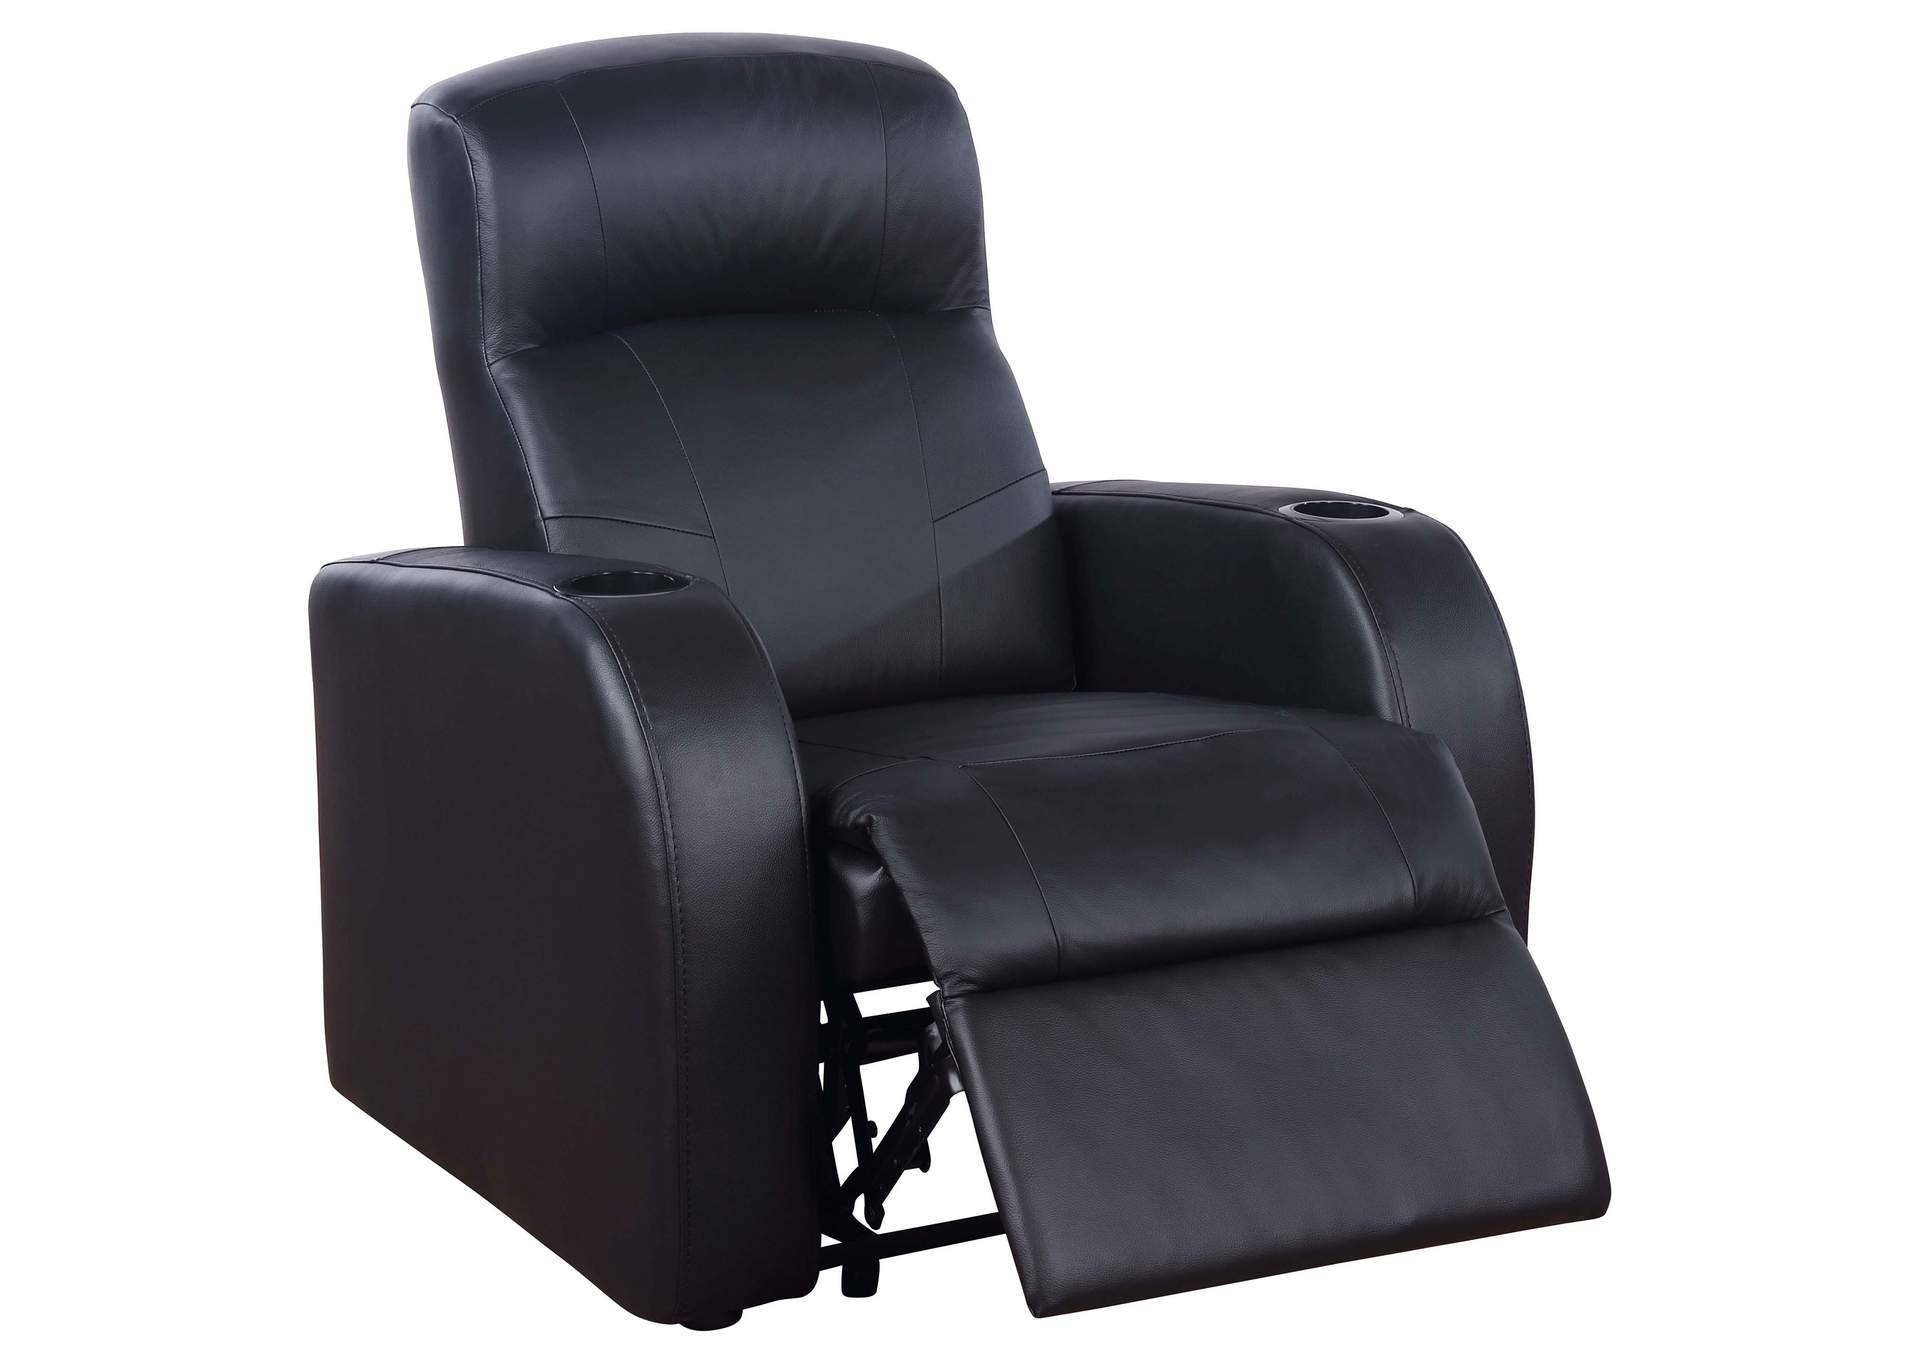 Cyrus Home Theater Upholstered Recliner Black,Coaster Furniture